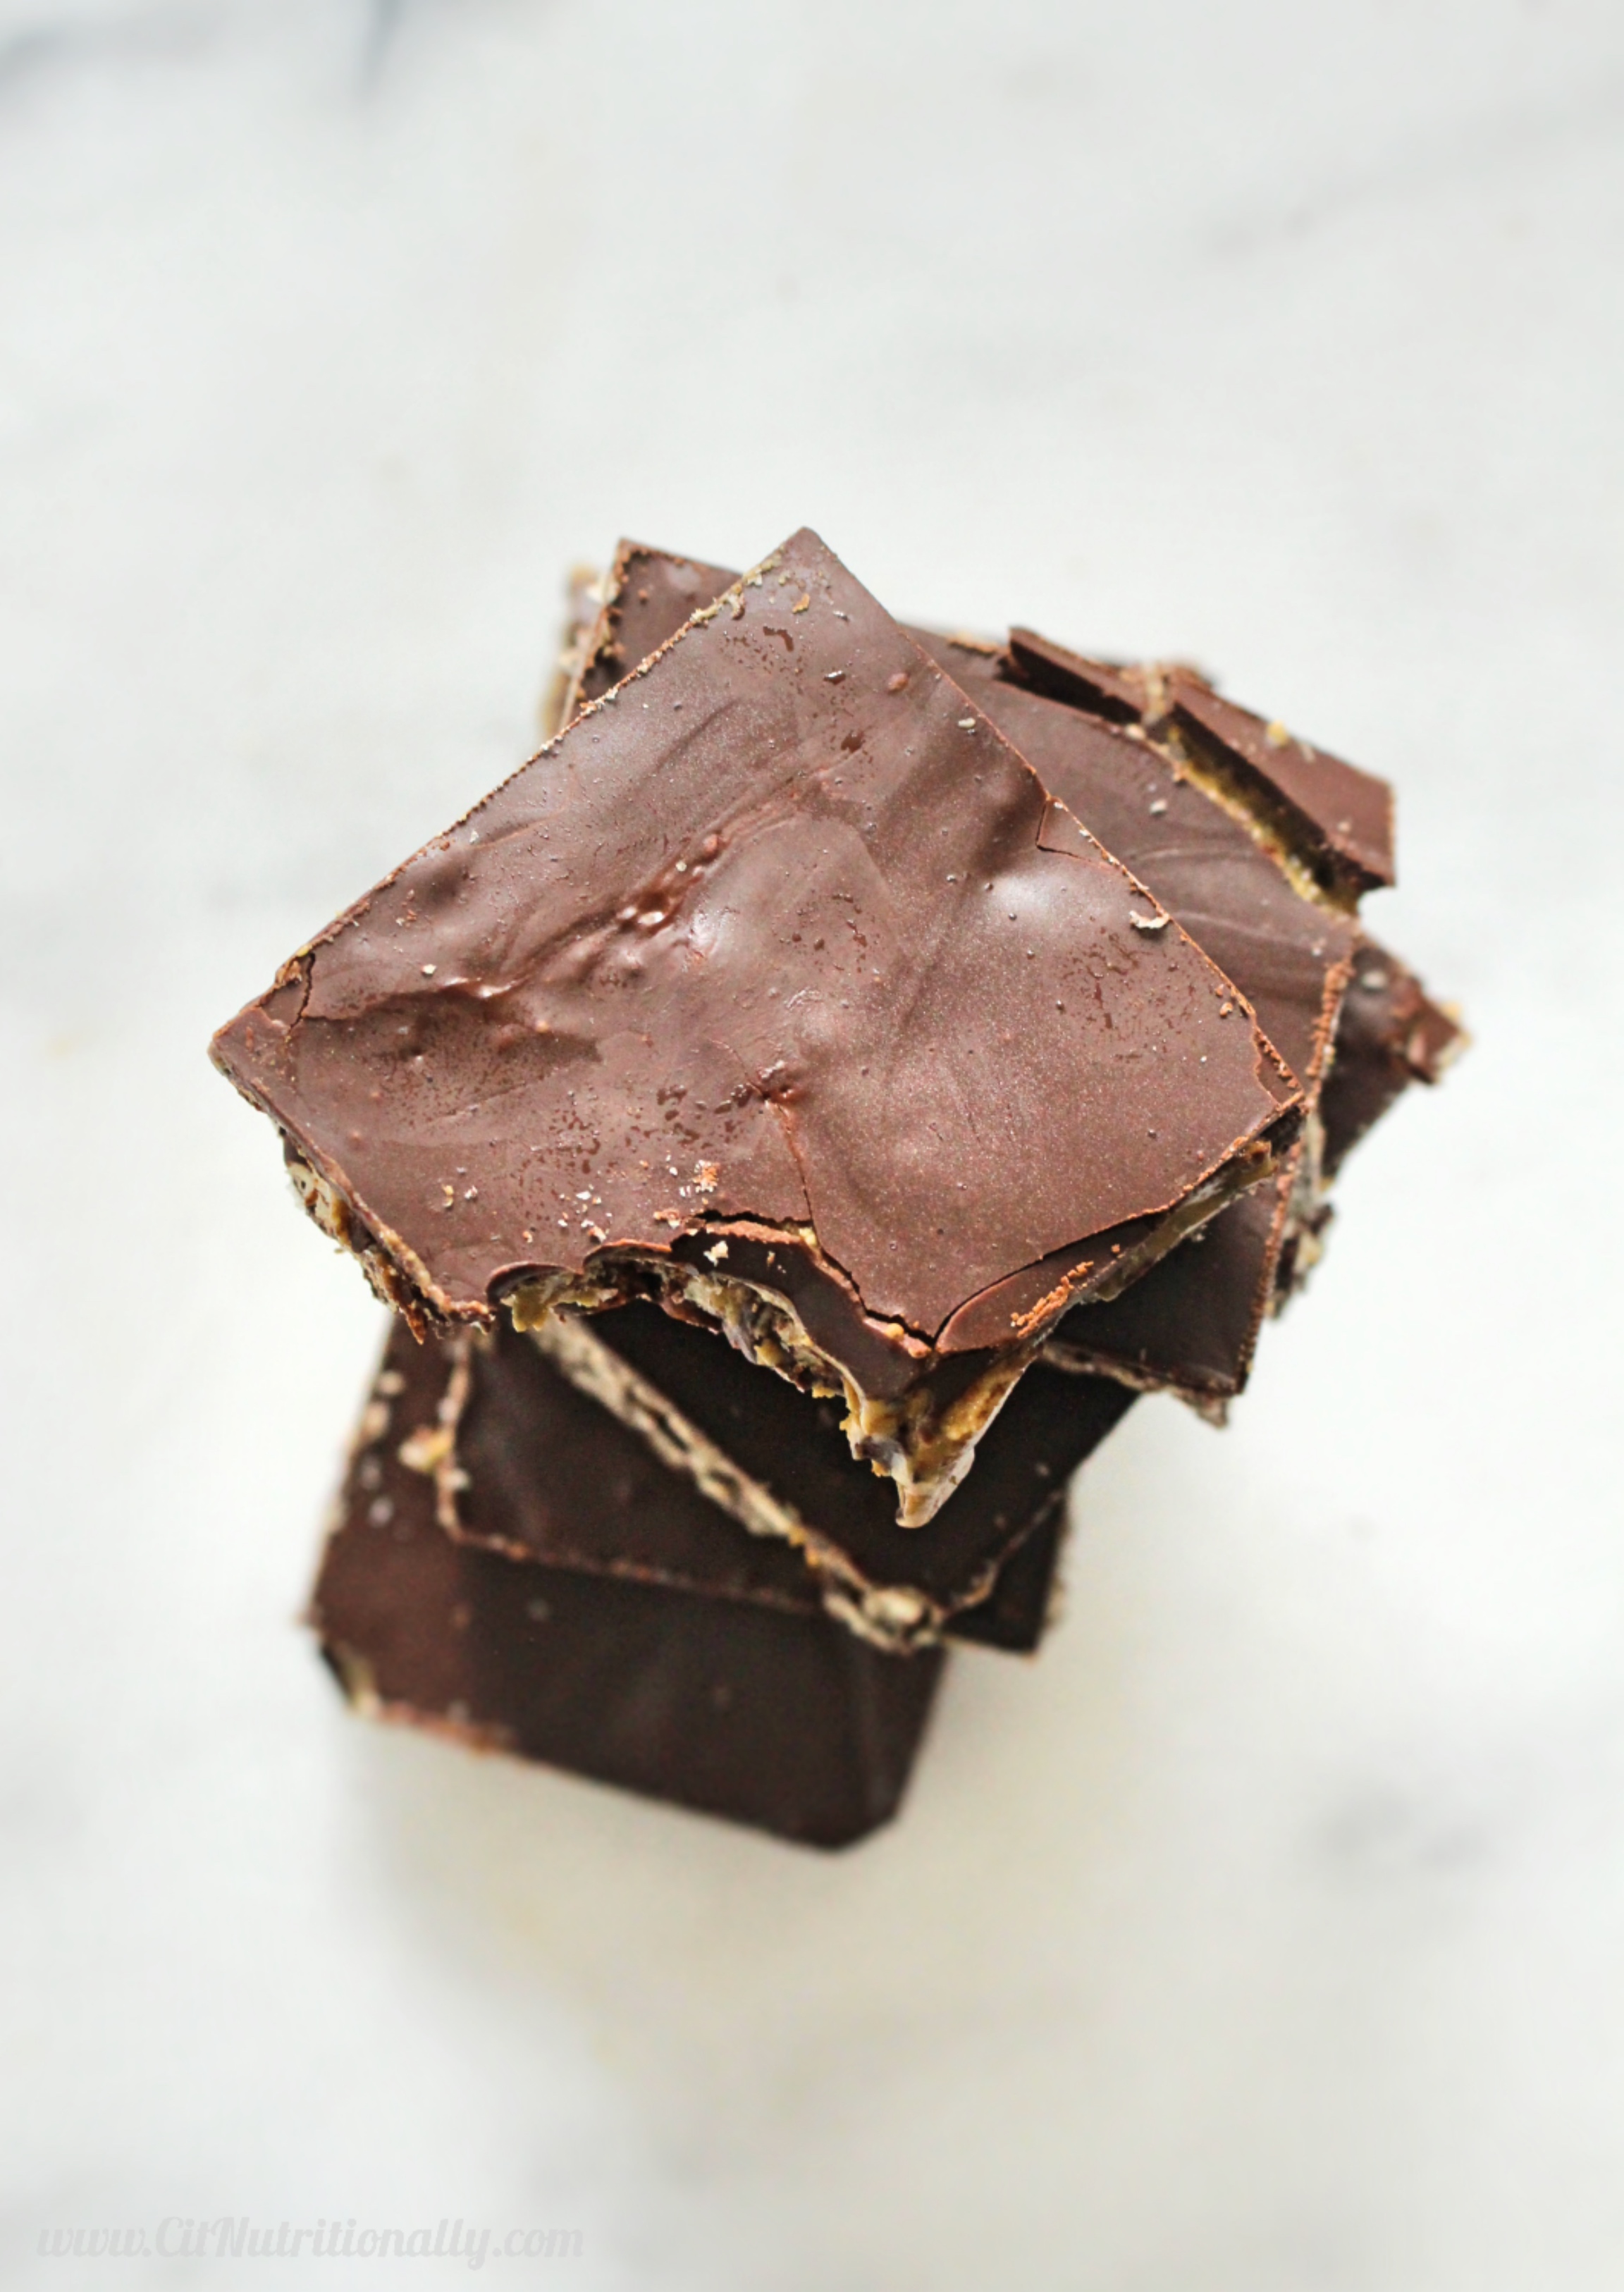 No Bake Chocolate Crunch Bars | C it Nutritionally Chocolatey, crunchy, and the easiest dessert ever, these No Bake Chocolate Crunch Bars are a delicious treat or gift! Nut Free, Gluten Free, Dairy Free, Soy Free